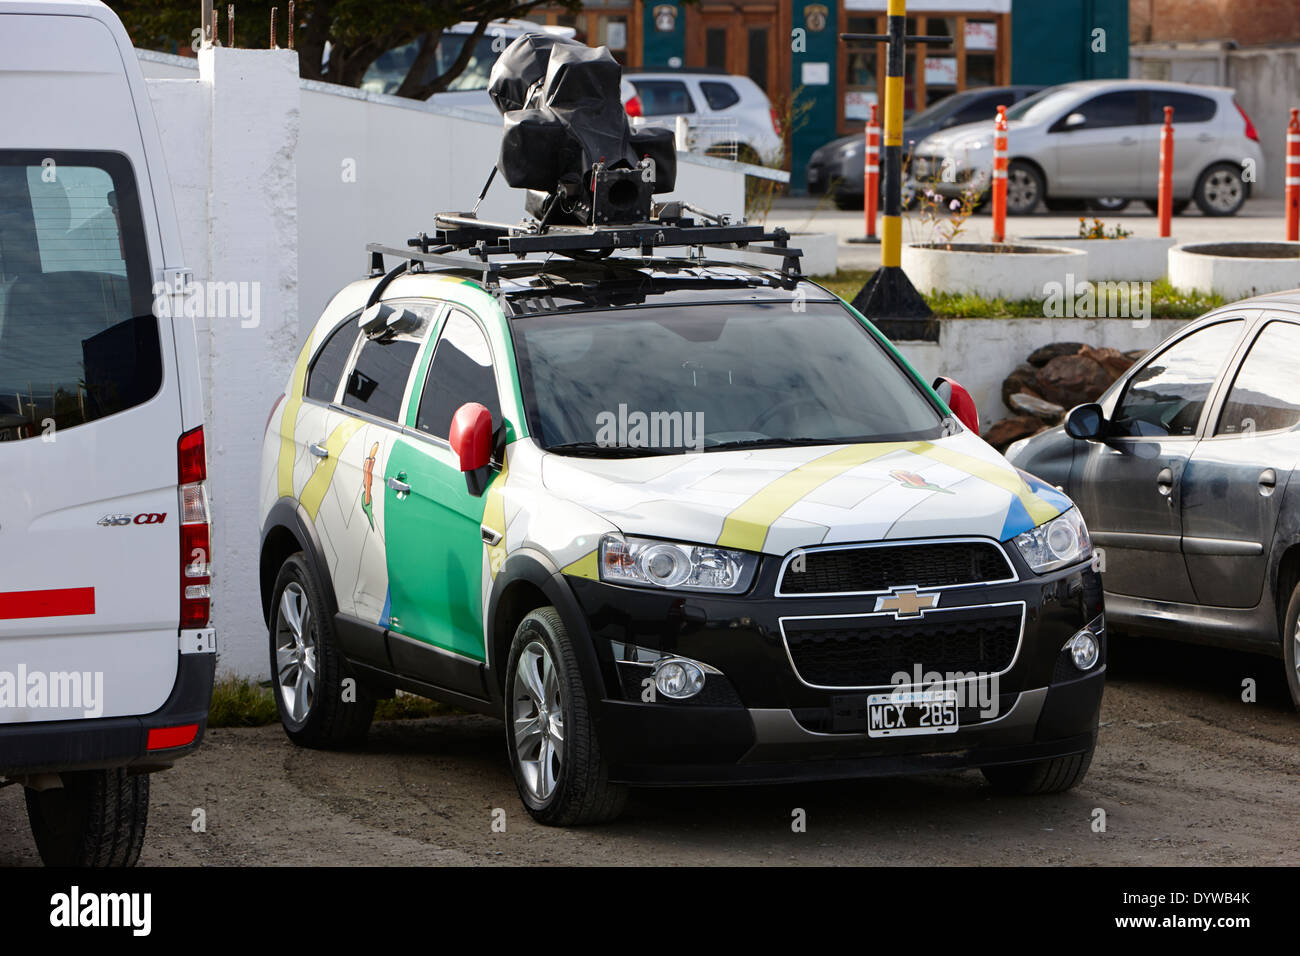 google street view car parked in ushuaia argentina Stock Photo